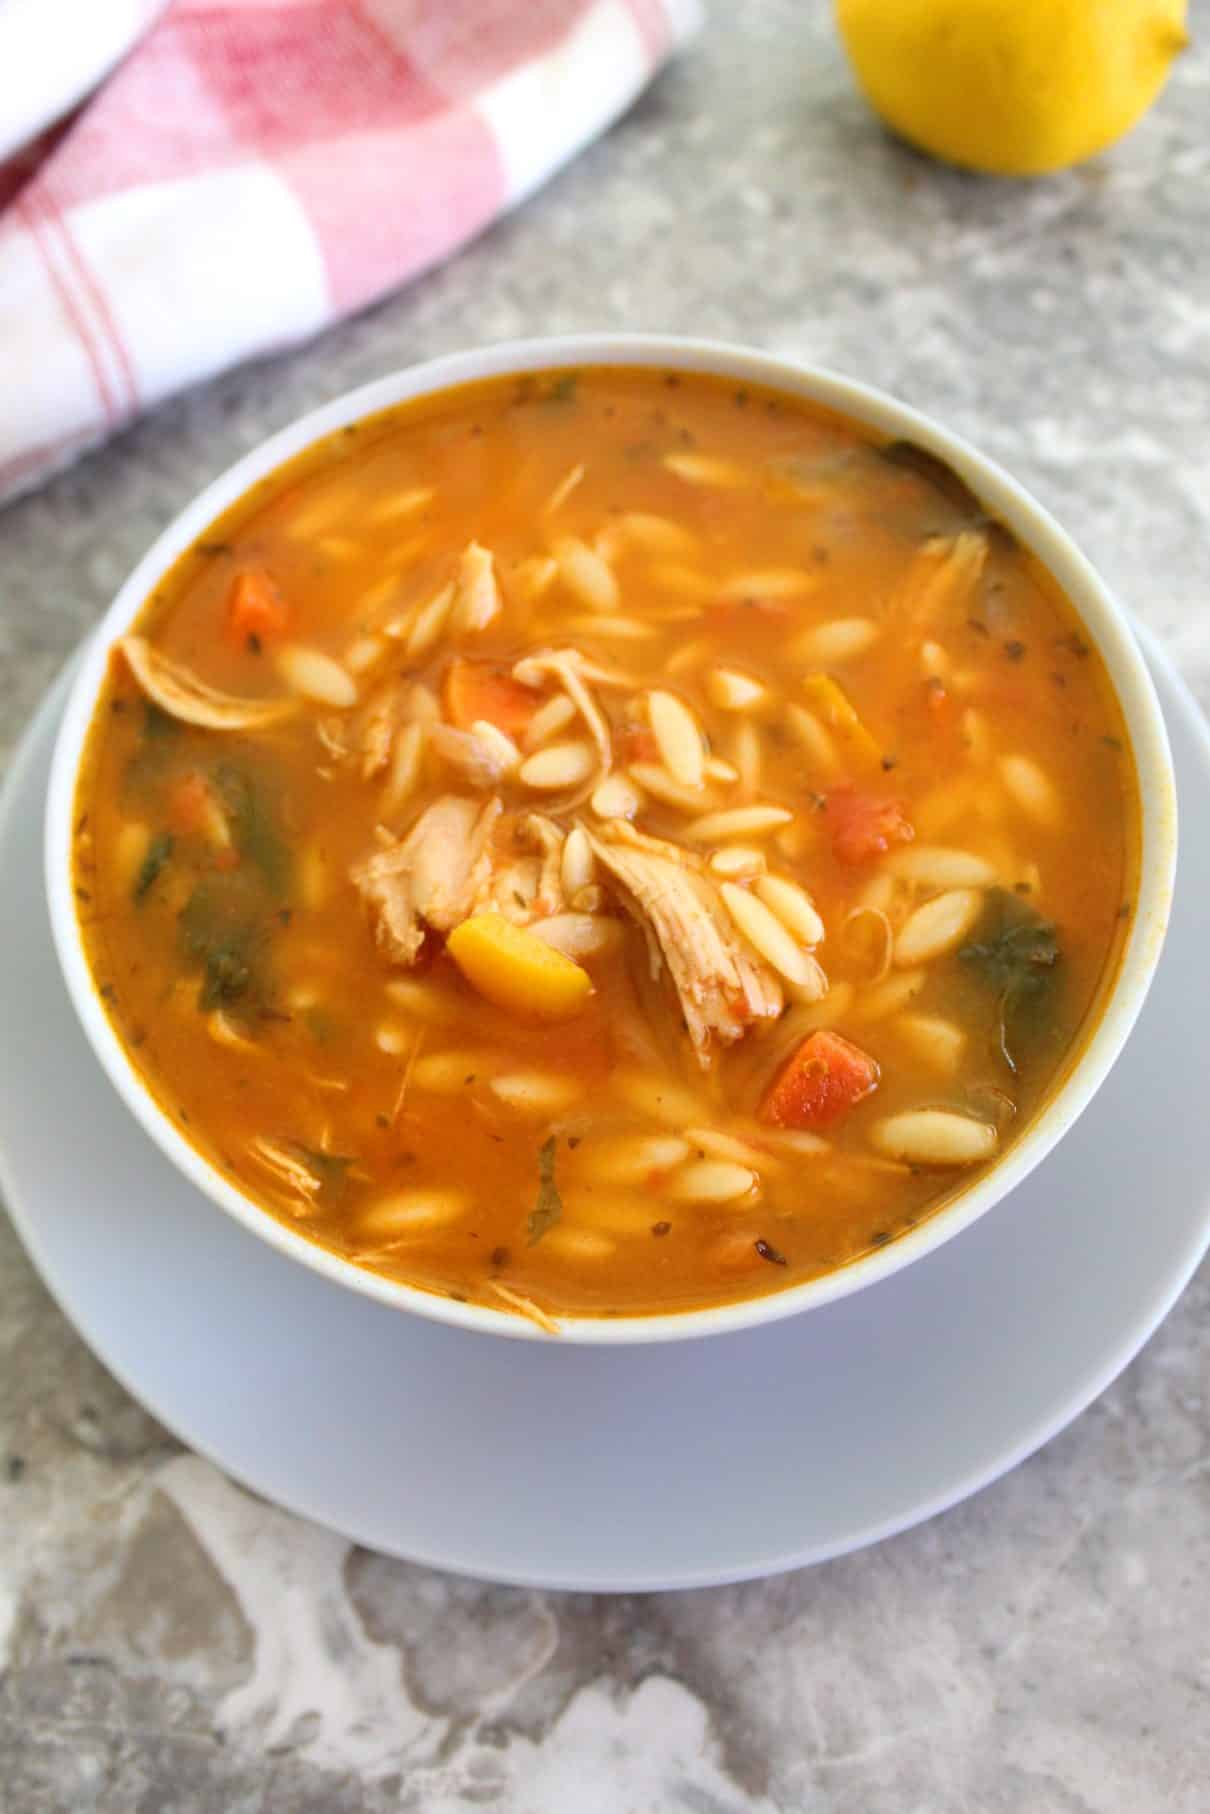 An appetizing bowl of orzo soup showing some shredded turkey, spinach and other vegetables swimming in the soup in a close up shot.